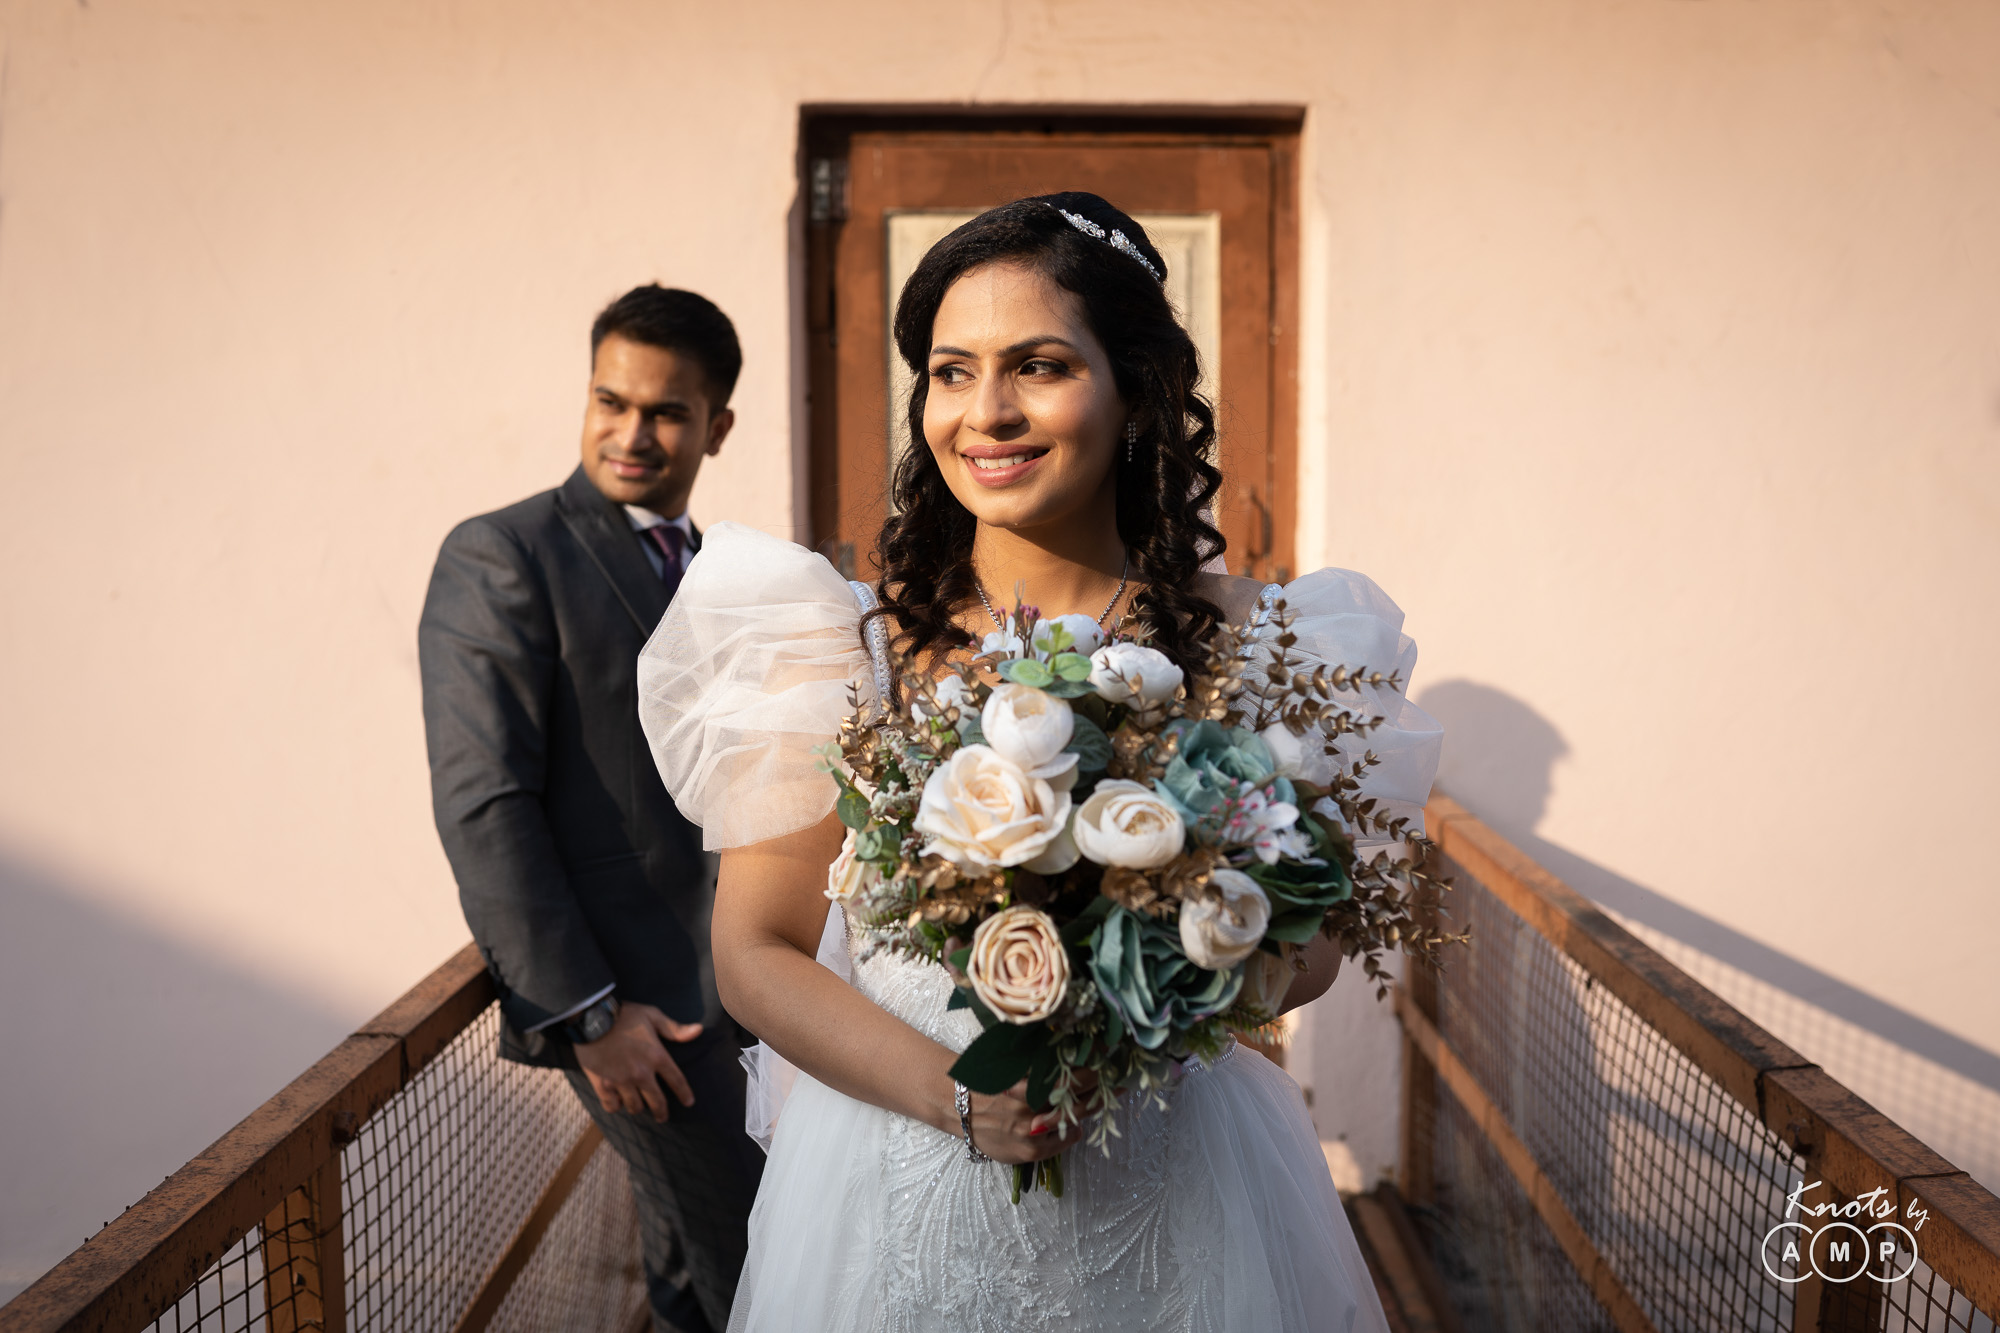 CHRISTIAN WEDDING PHOTOGRAPHY IN COIMBATORE - IRICH PHOTOGRAPHY